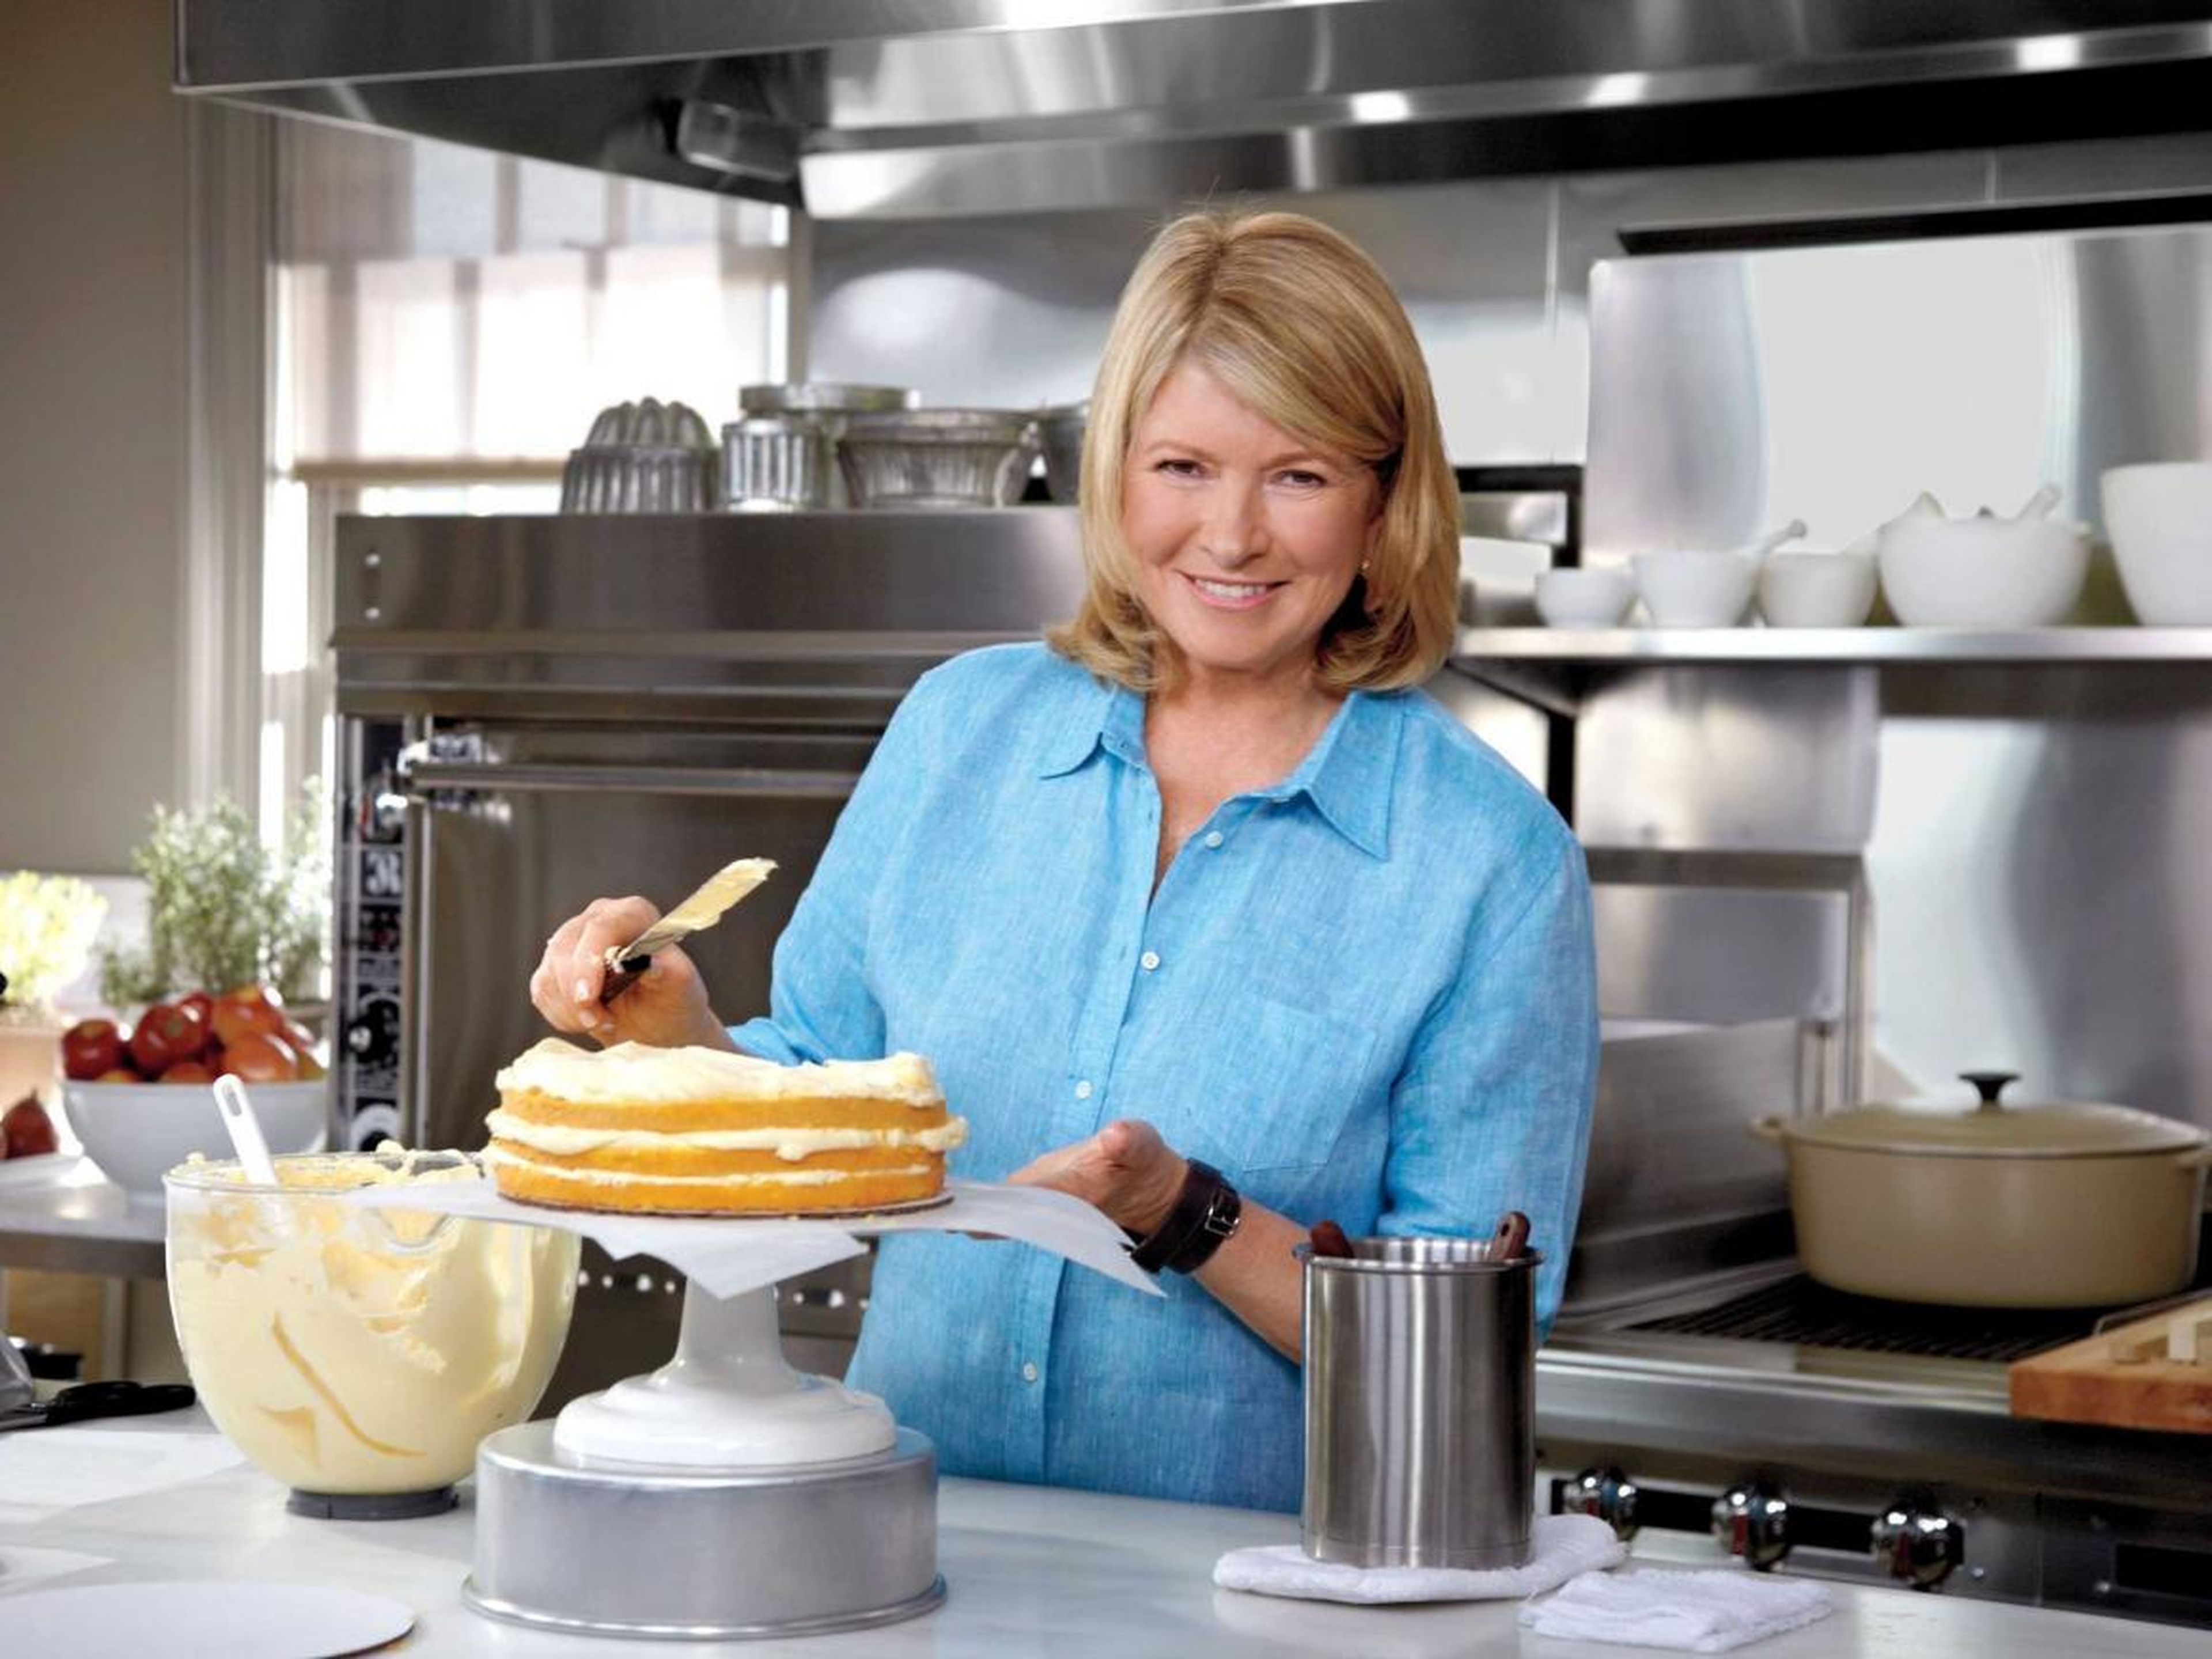 But he's not the only one: Martha Stewart is so busy running her business that she reportedly gets less than four hours' sleep a night.